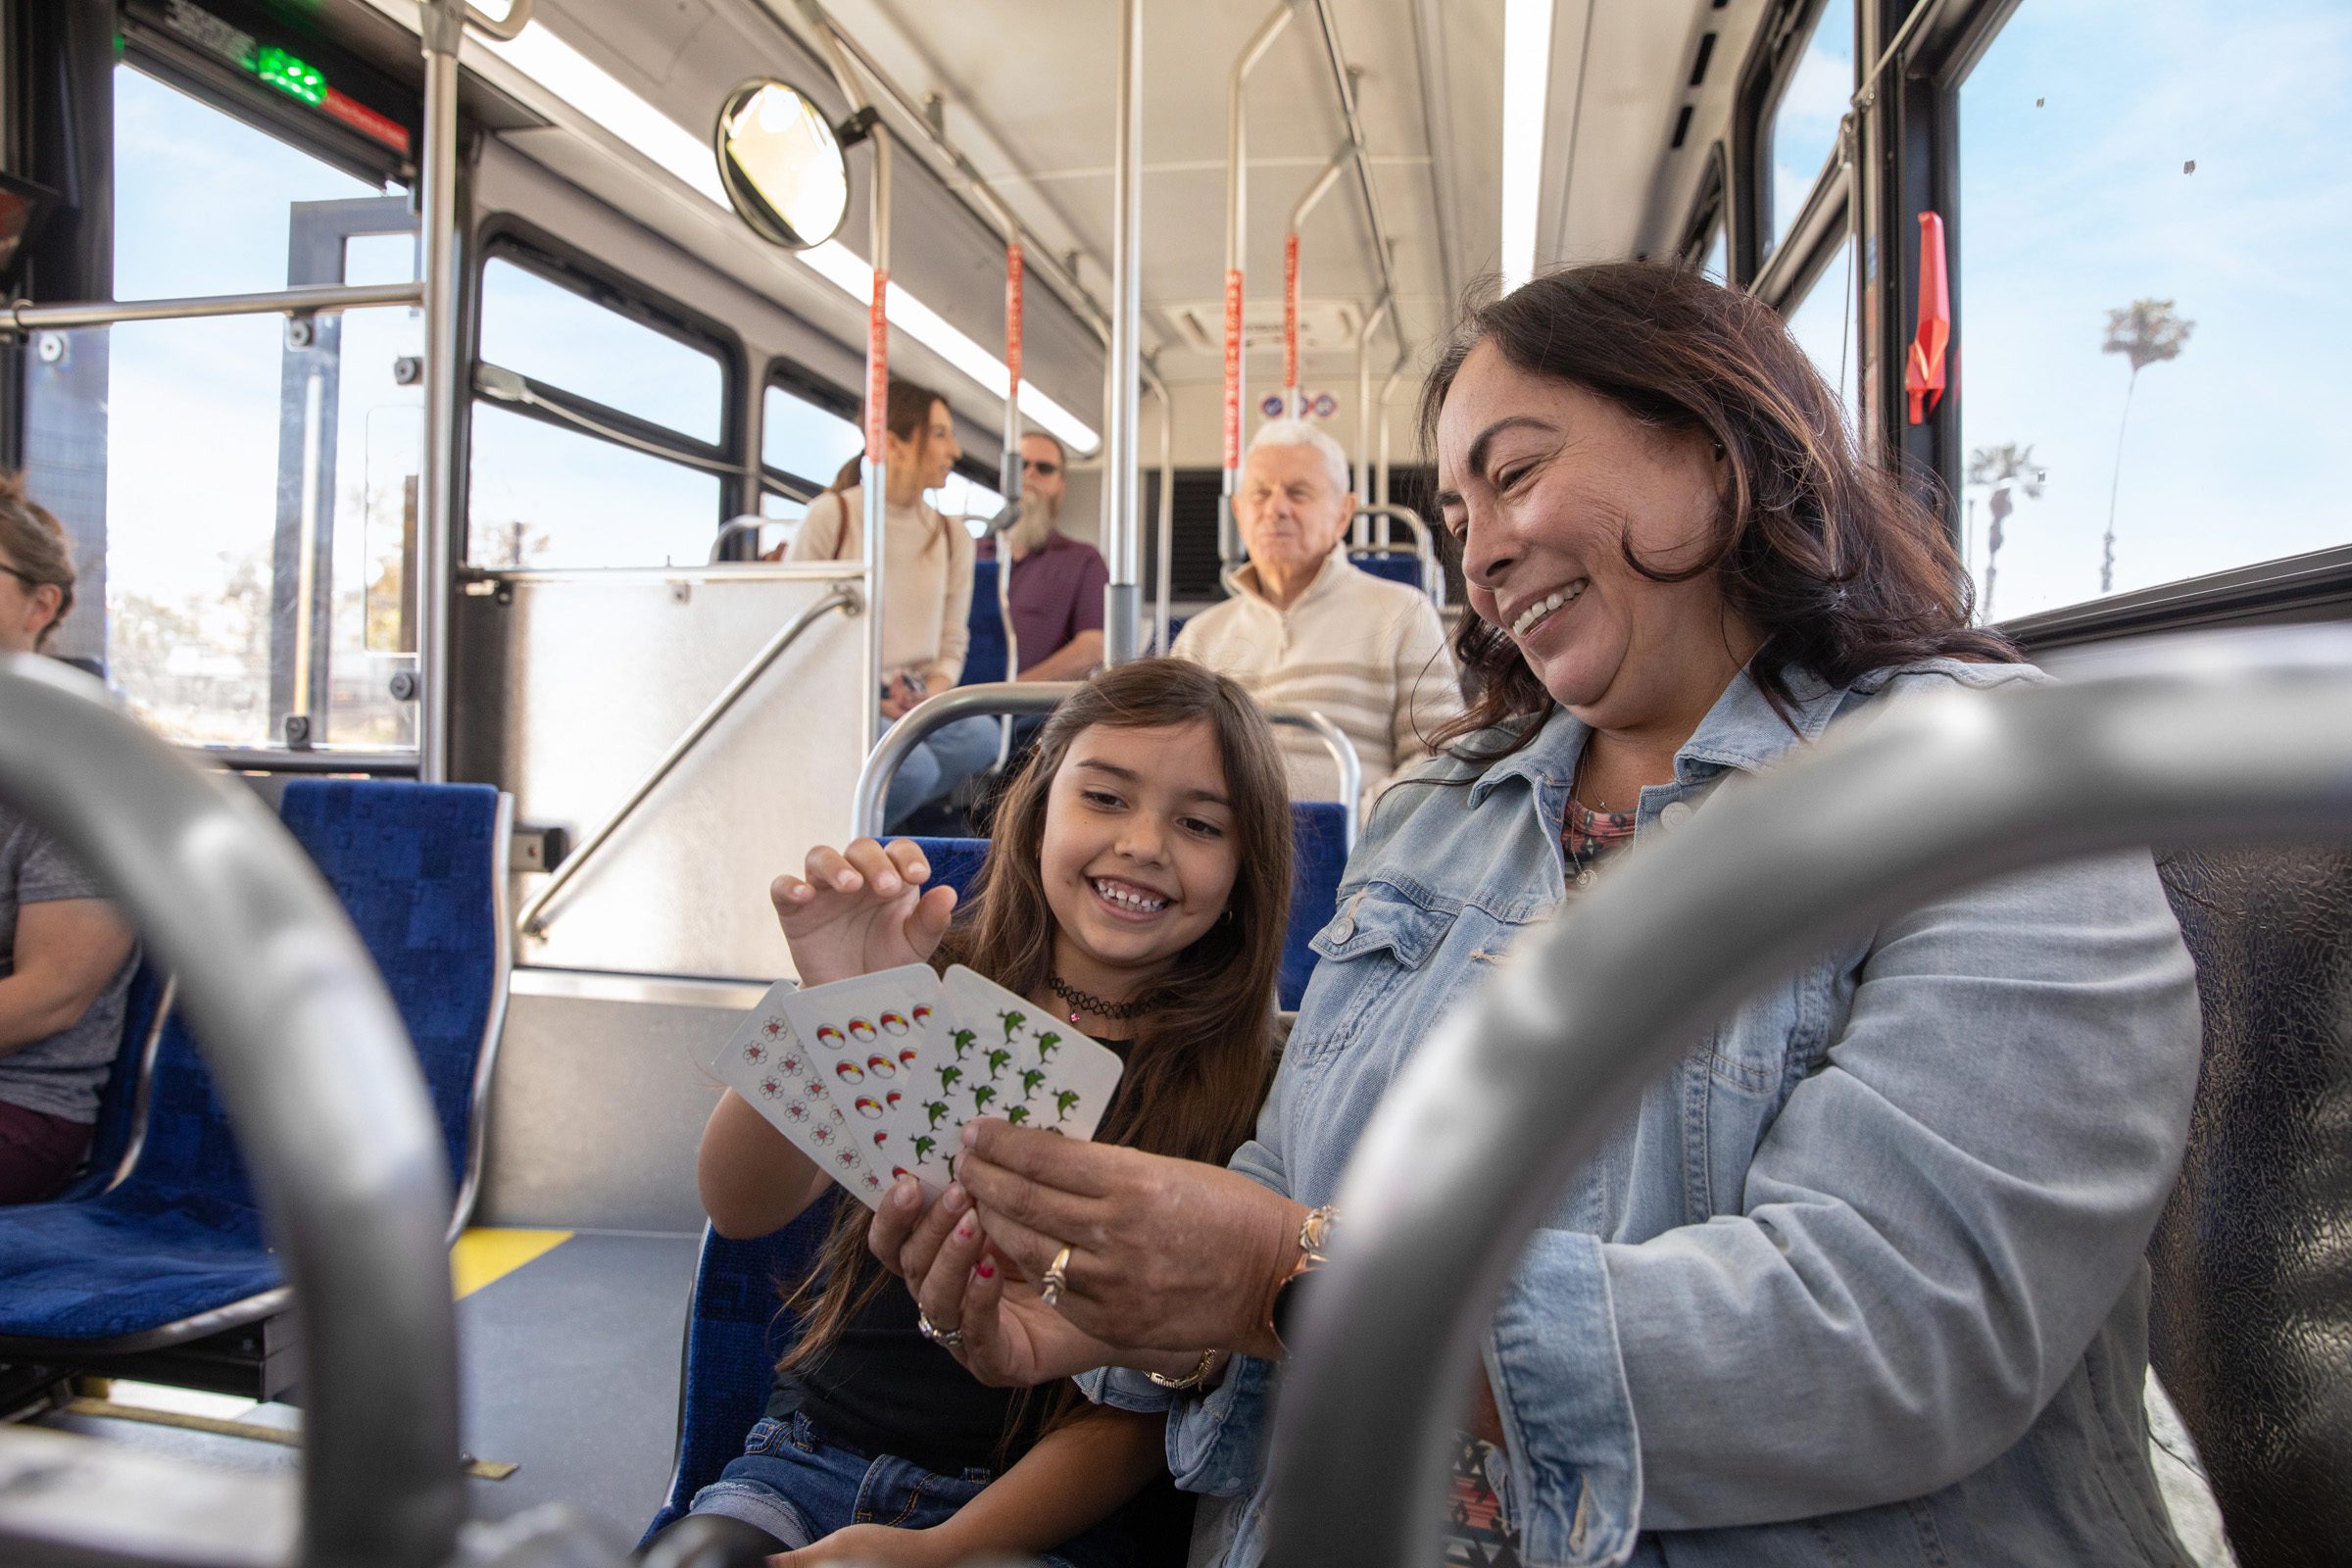 A woman and girl play cards while they sit on the bus